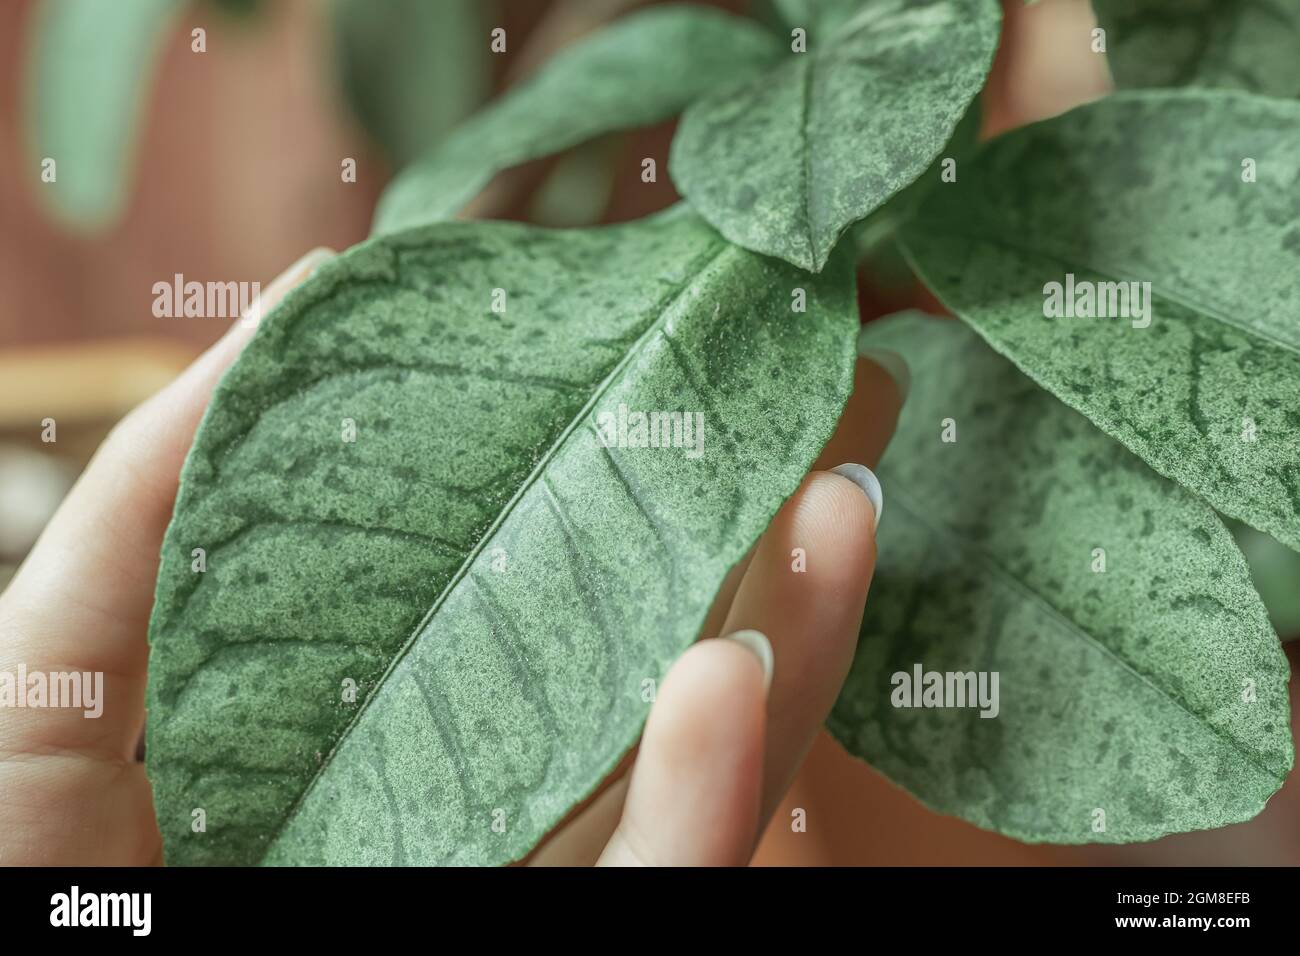 Lemon tree leaf infected with a virus or chlorosis disease Stock Photo